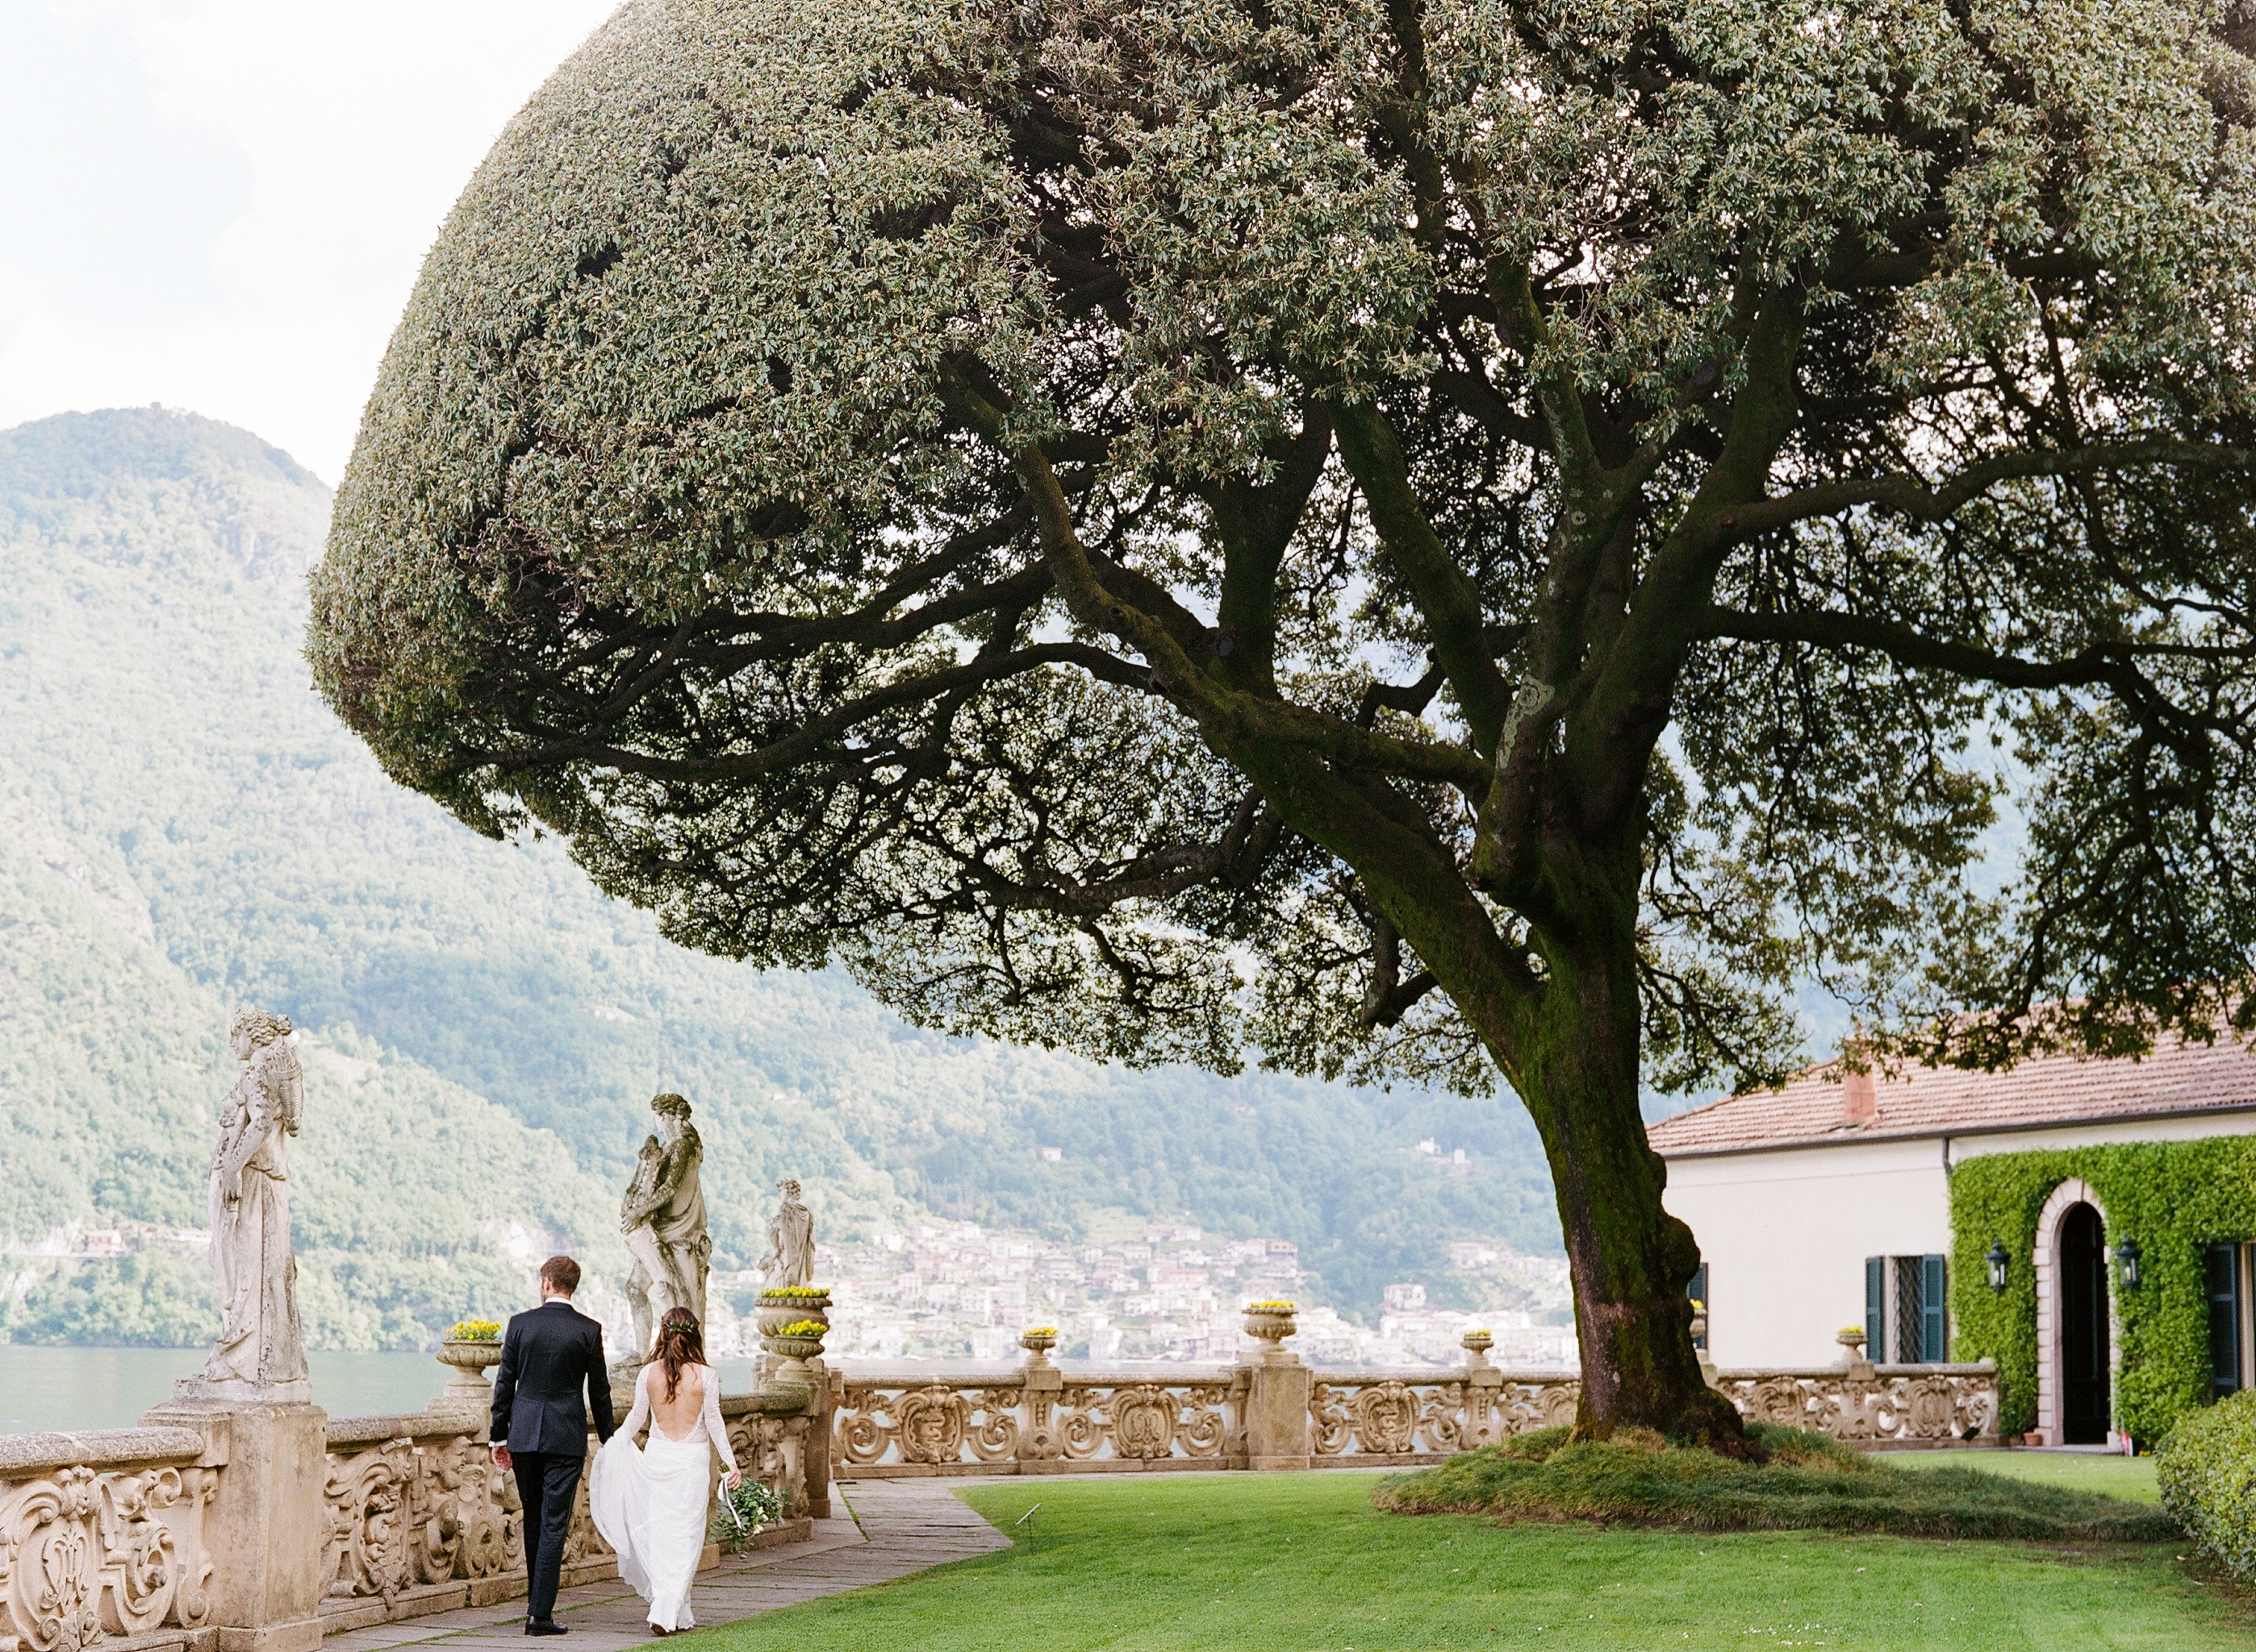 Elopements: How to find the ideal location - Lake Como